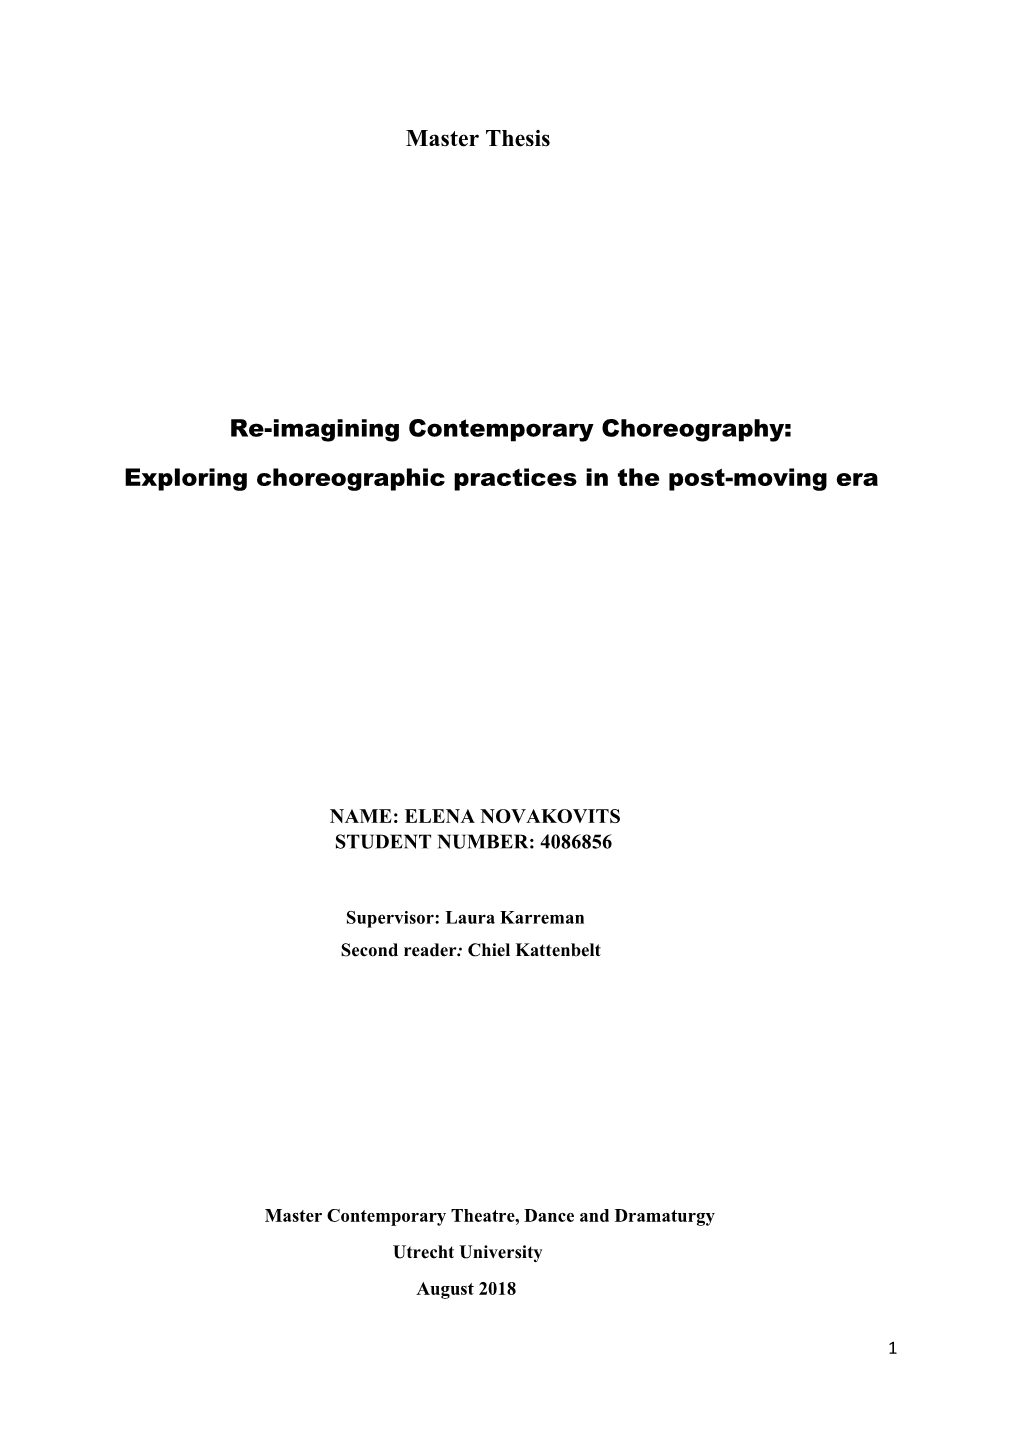 Master Thesis Re-Imagining Contemporary Choreography